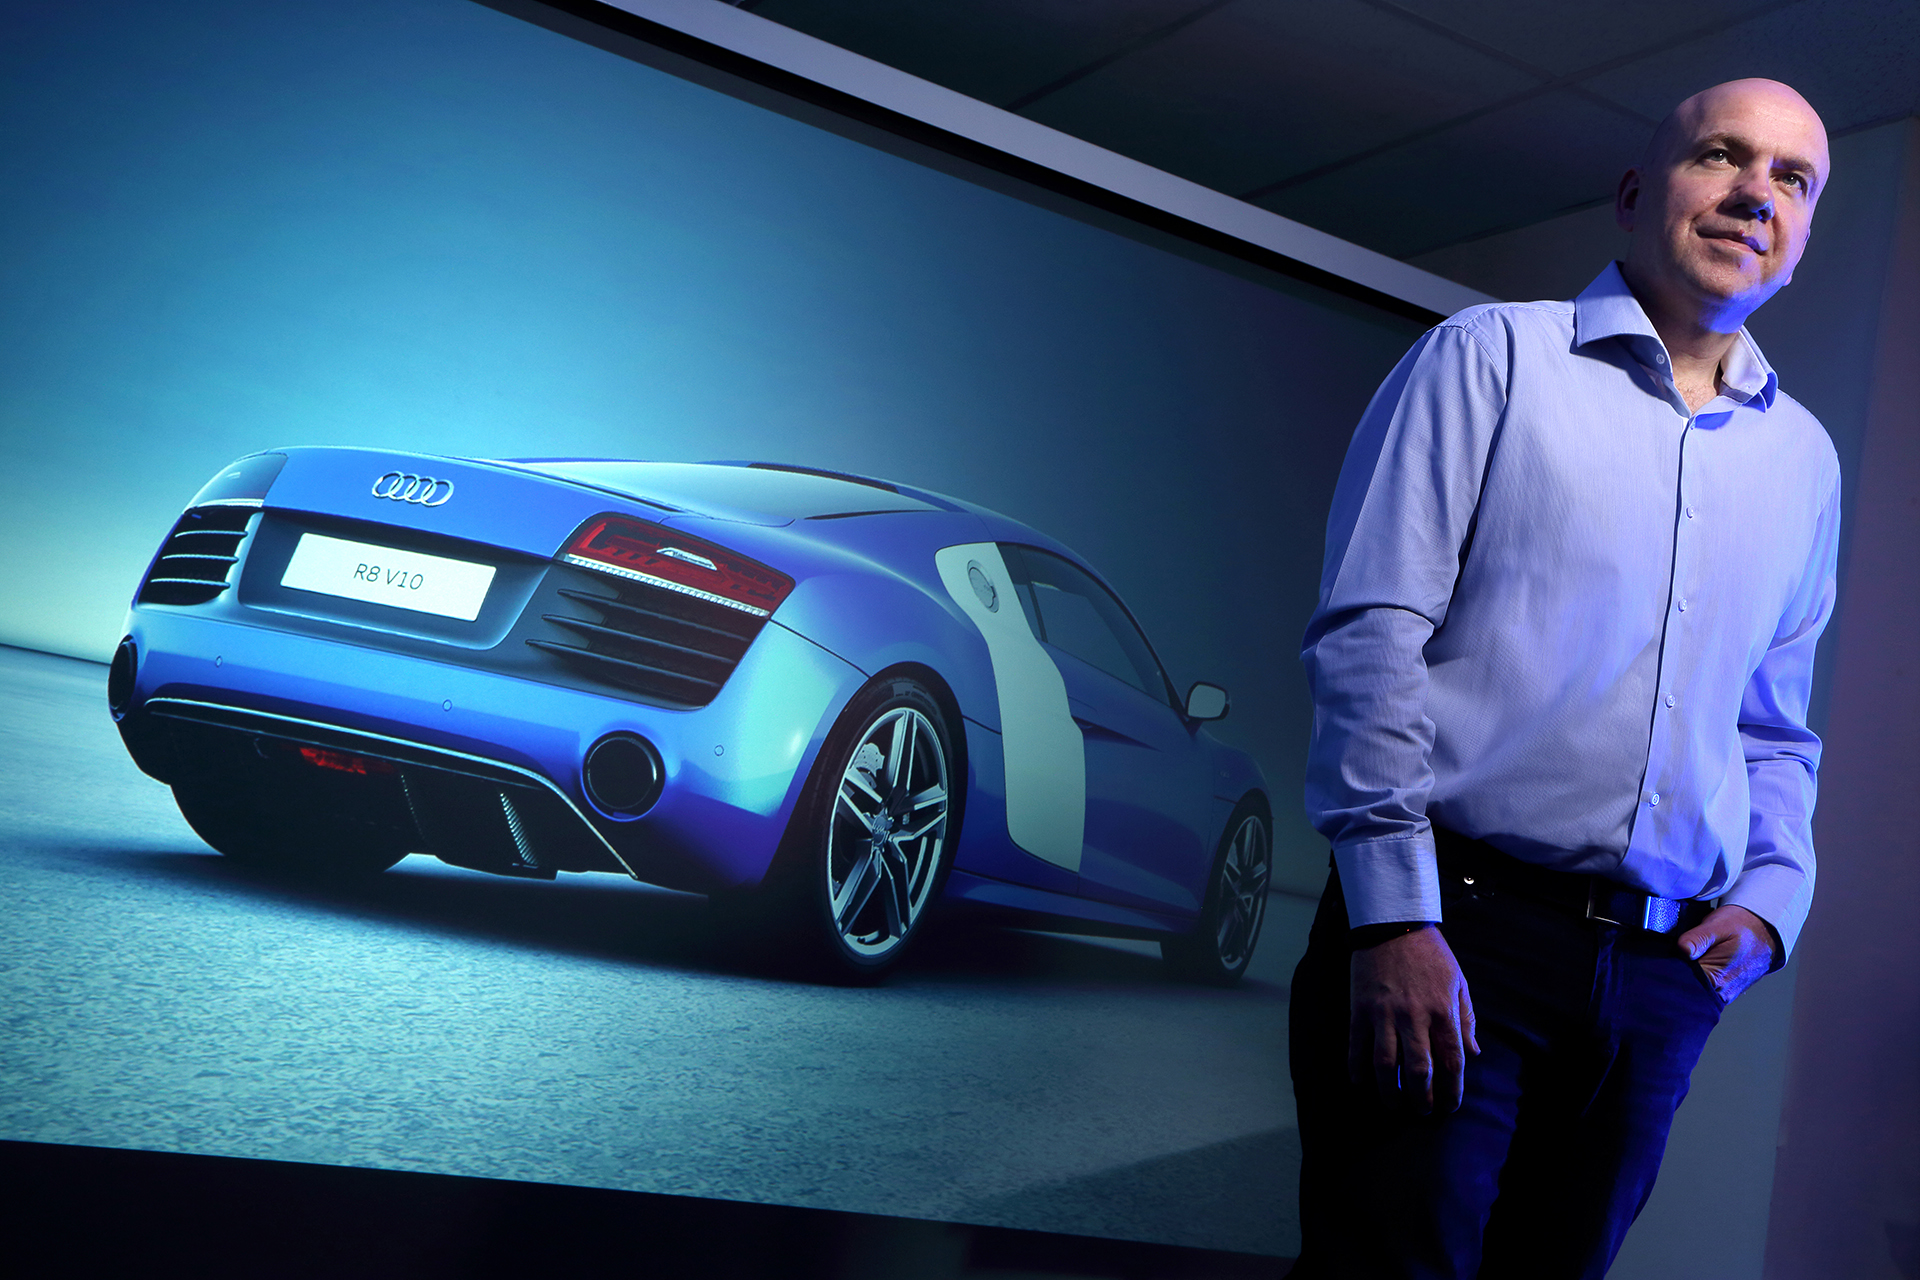 ZeroLight CEO, Darren Jobling: “Audi revolutionised the car purchasing process with the launch of their innovative Audi City dealerships and we’re very proud to be supporting them build on that succes